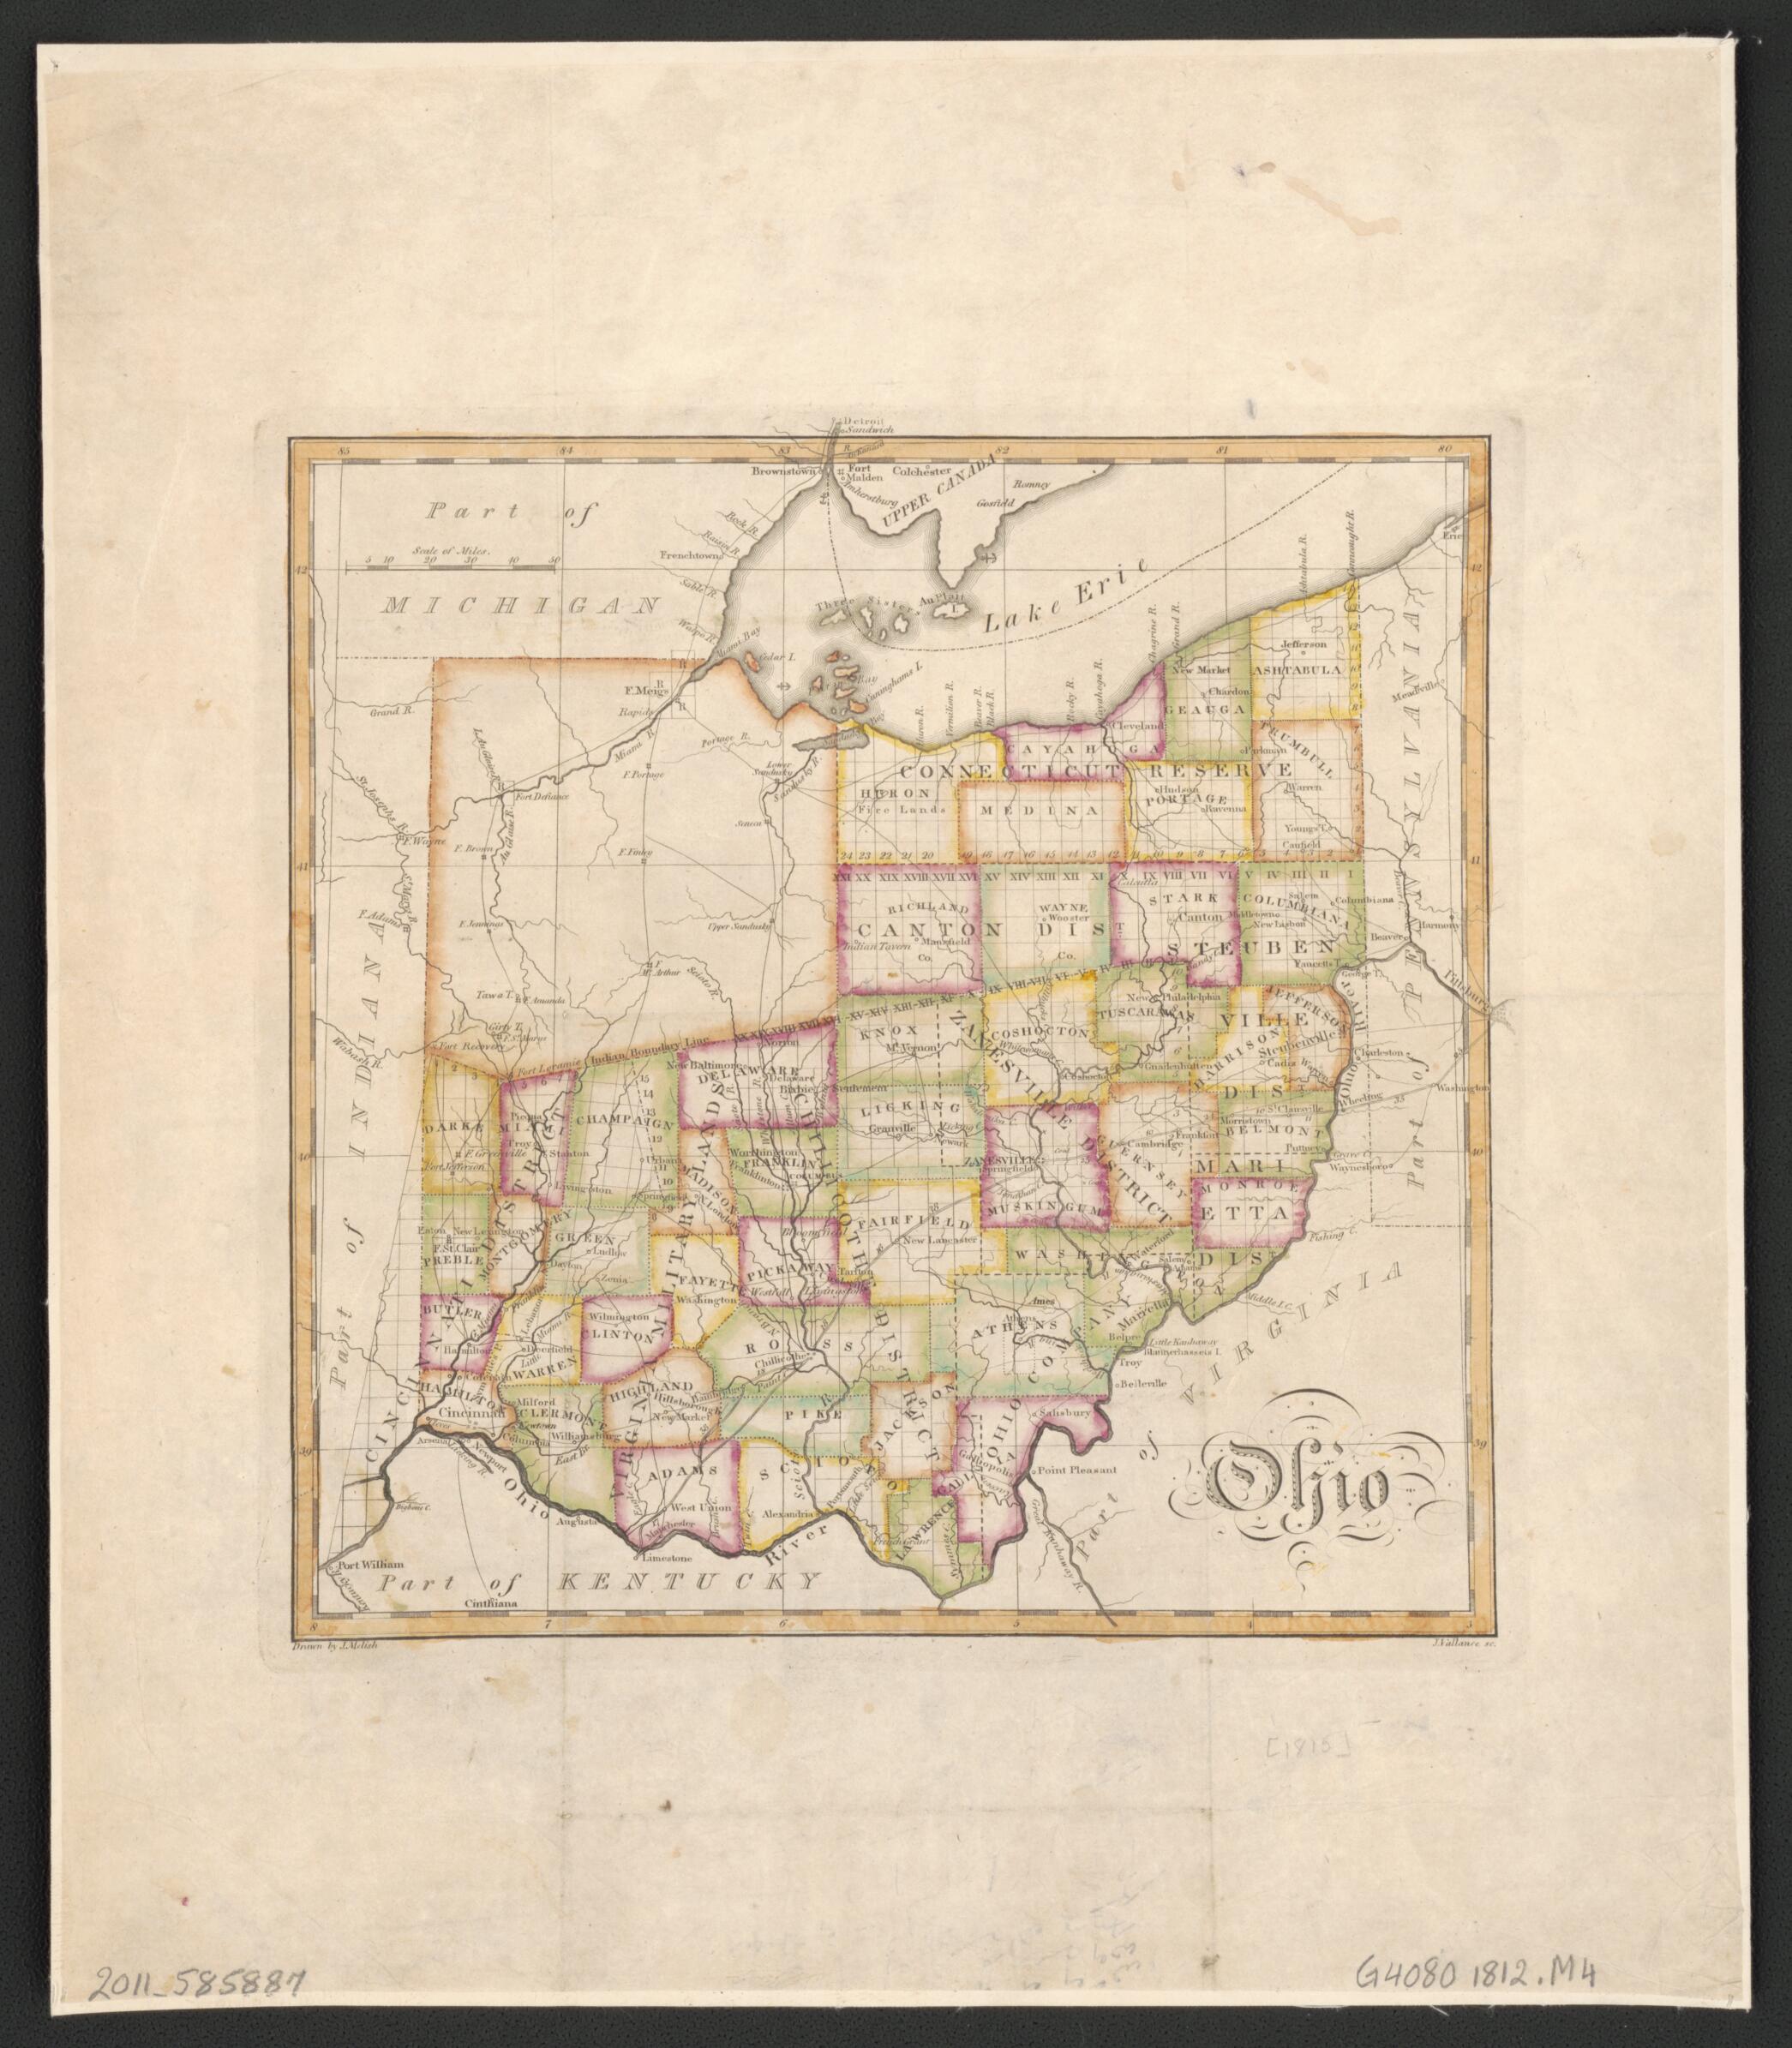 This old map of Ohio from 1812 was created by John Melish, J. (John) Vallance in 1812